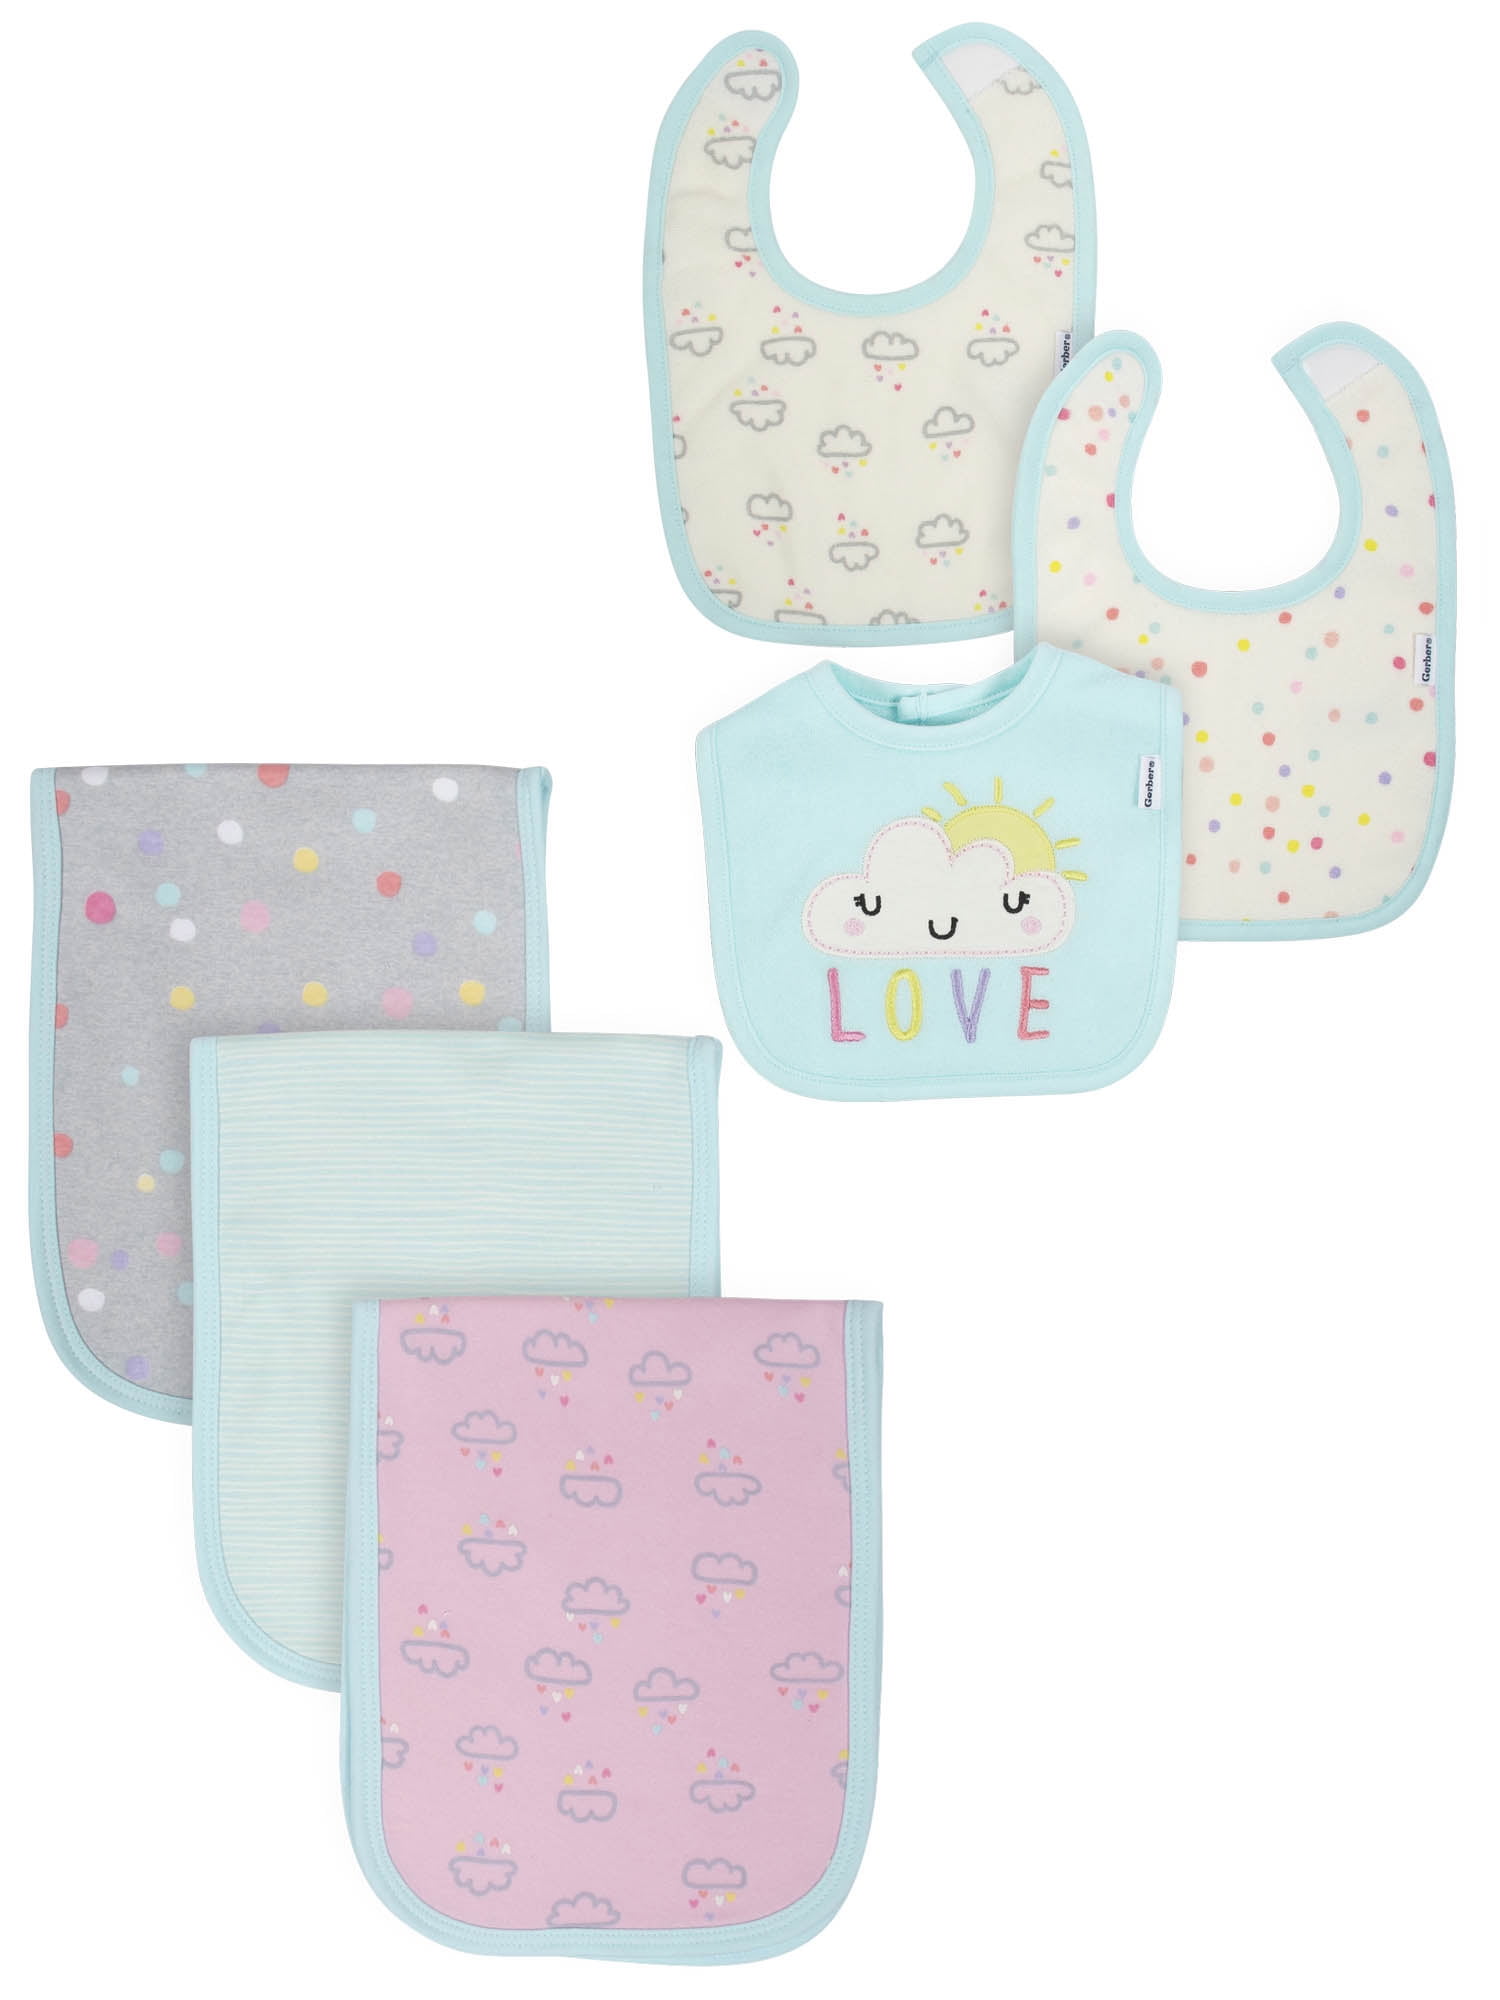 Marima Love in Hands Personalized Scarf Bib Feeding & Teething Fancy Baby Bibs and Burp Cloth Polyester Cotton